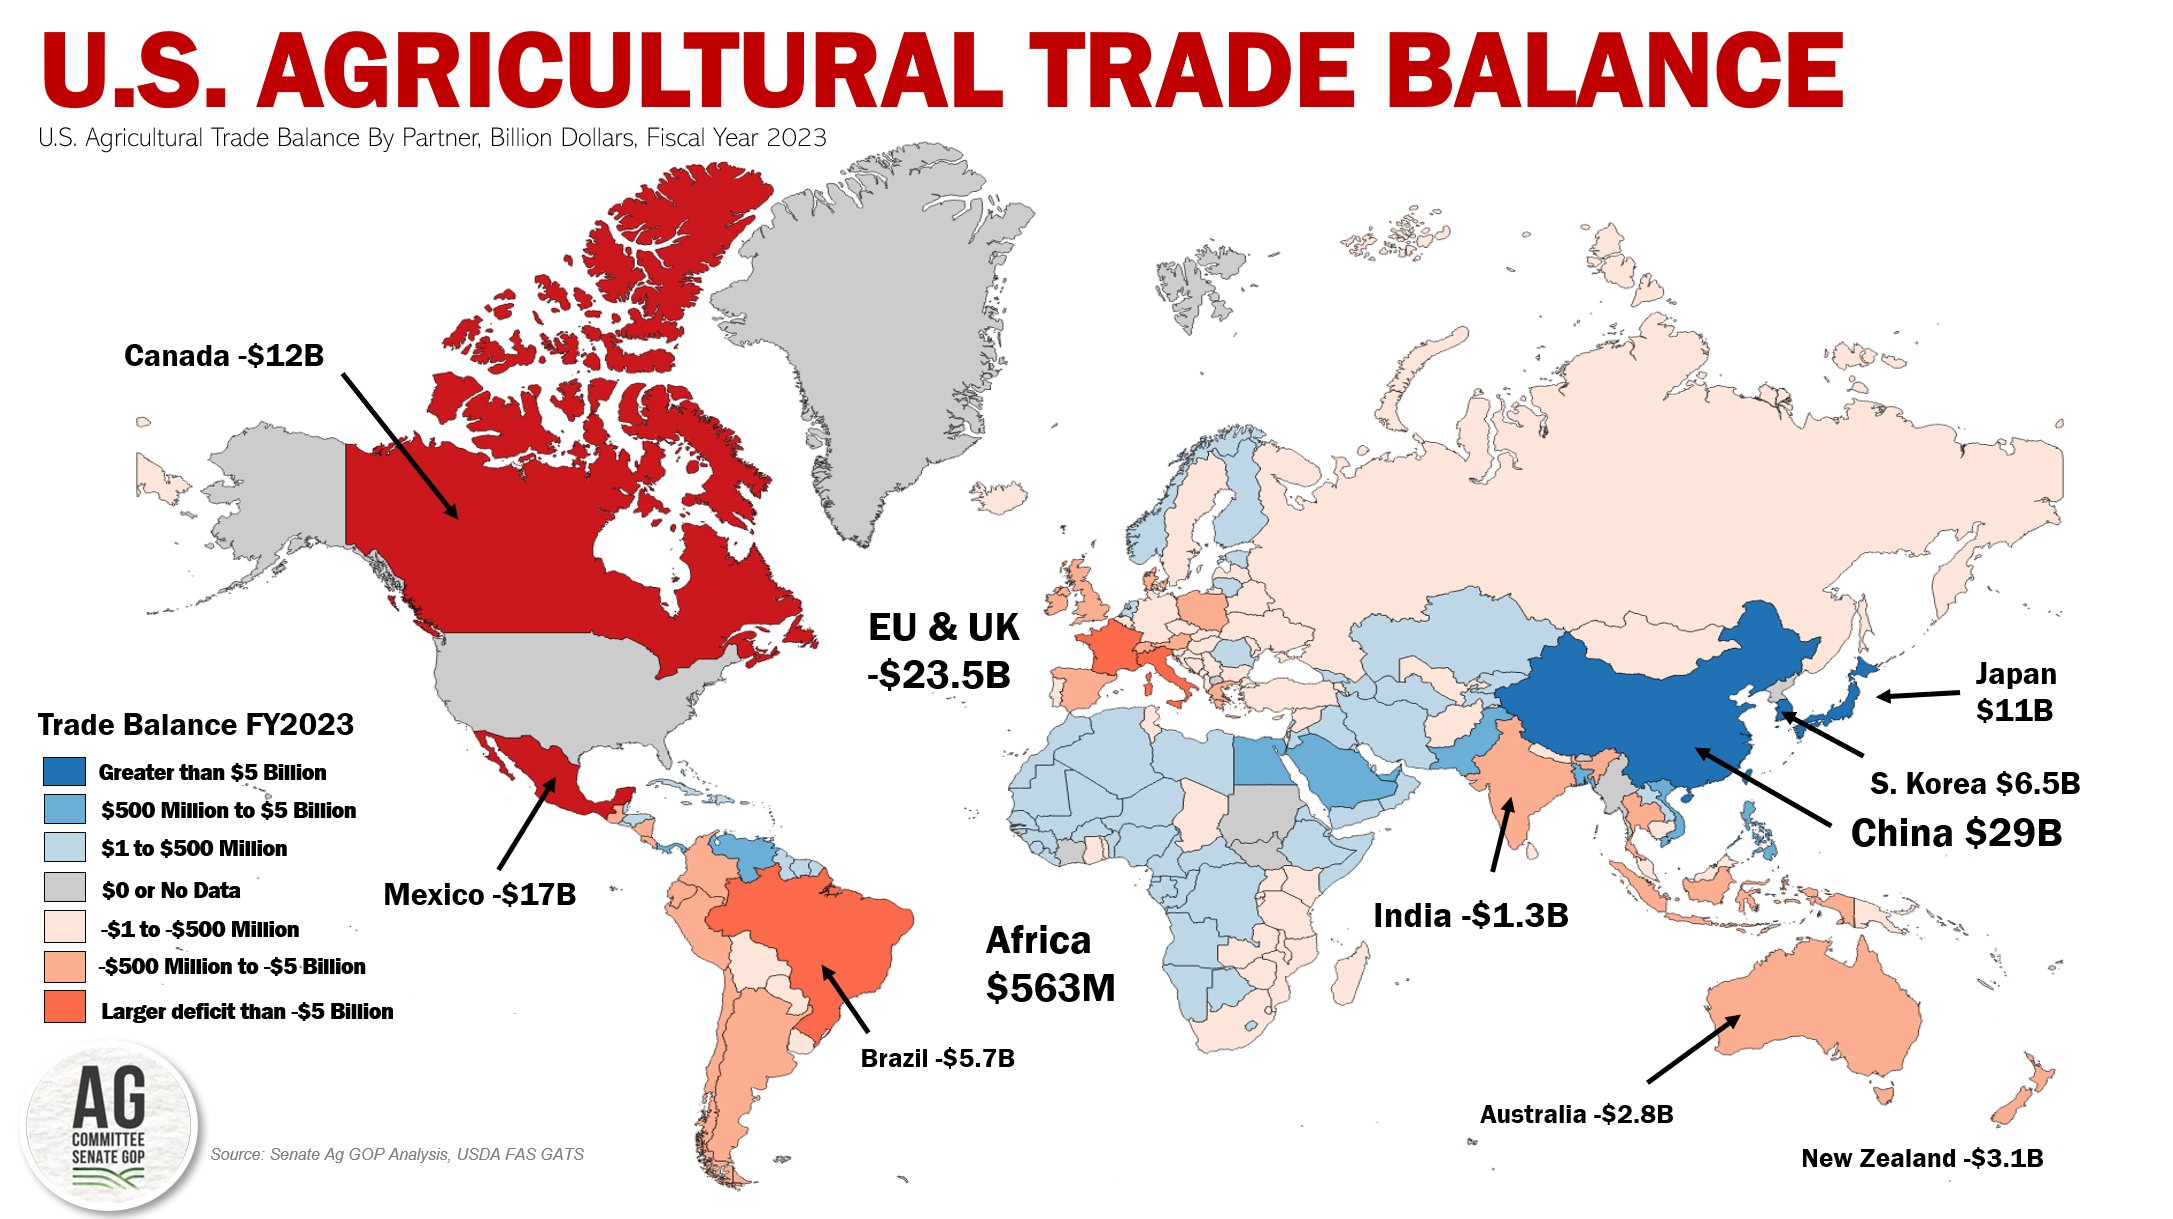 FAS graphic map of the U.S. Agricultural Trade Balance.